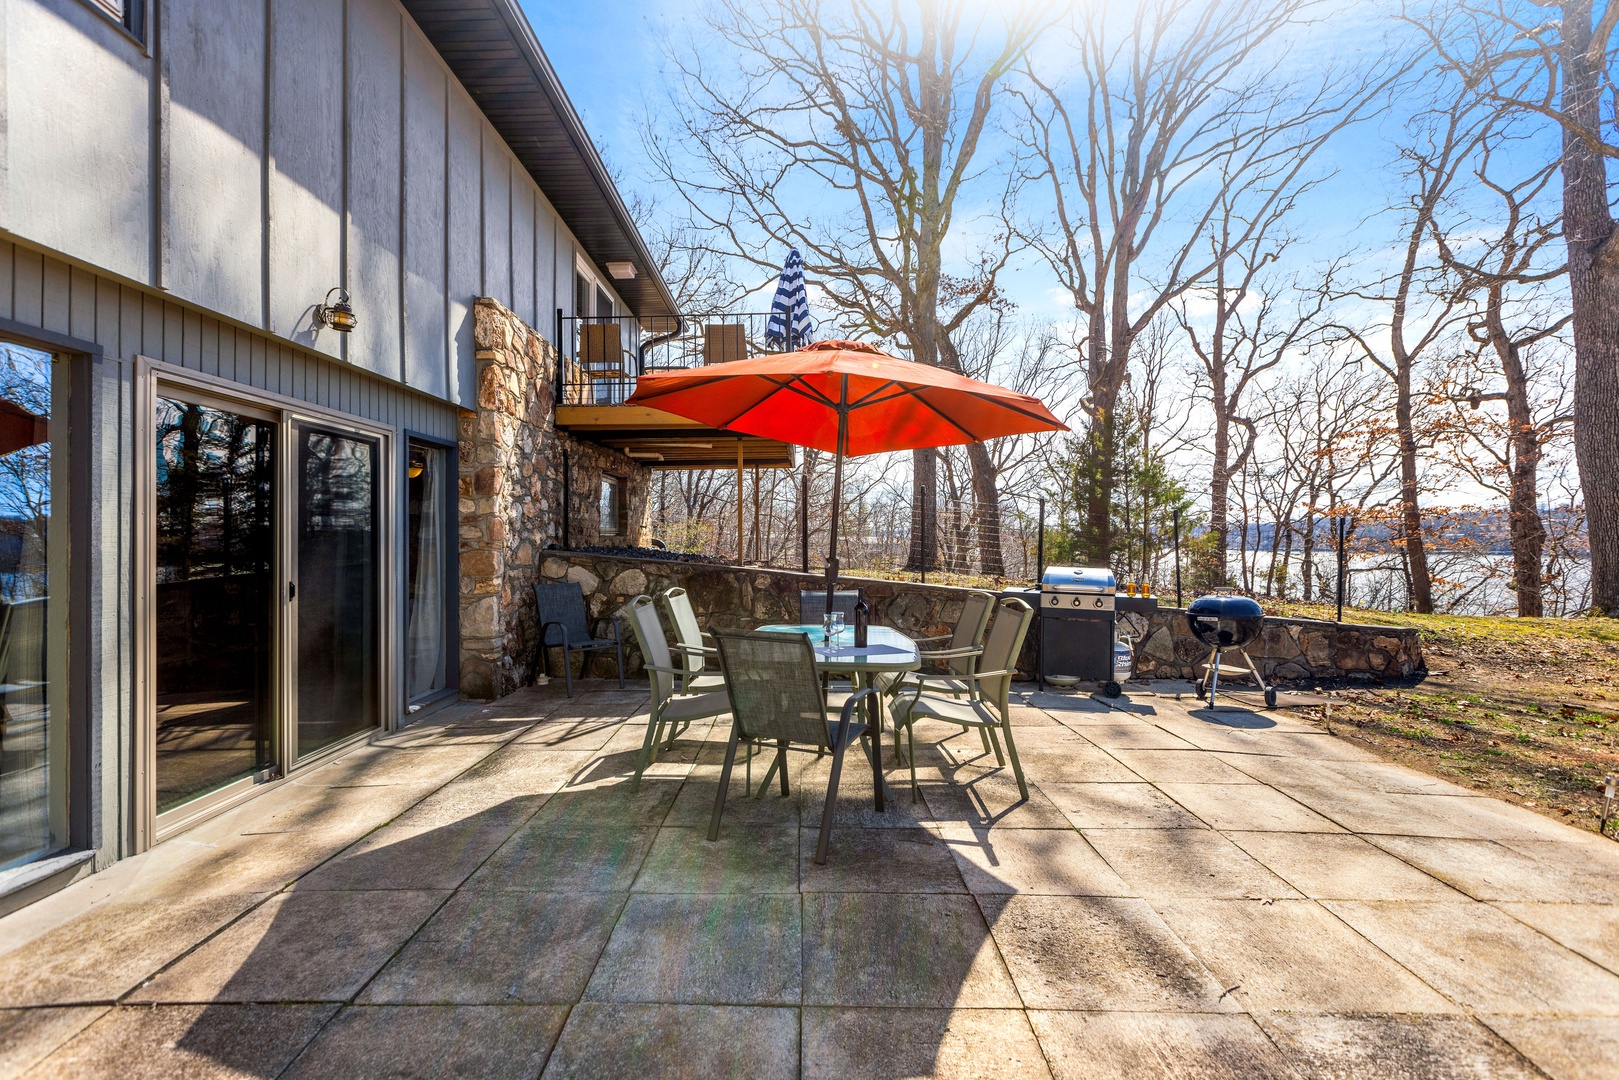 Outdoor patio with dual grills, ready for summer evening cookouts